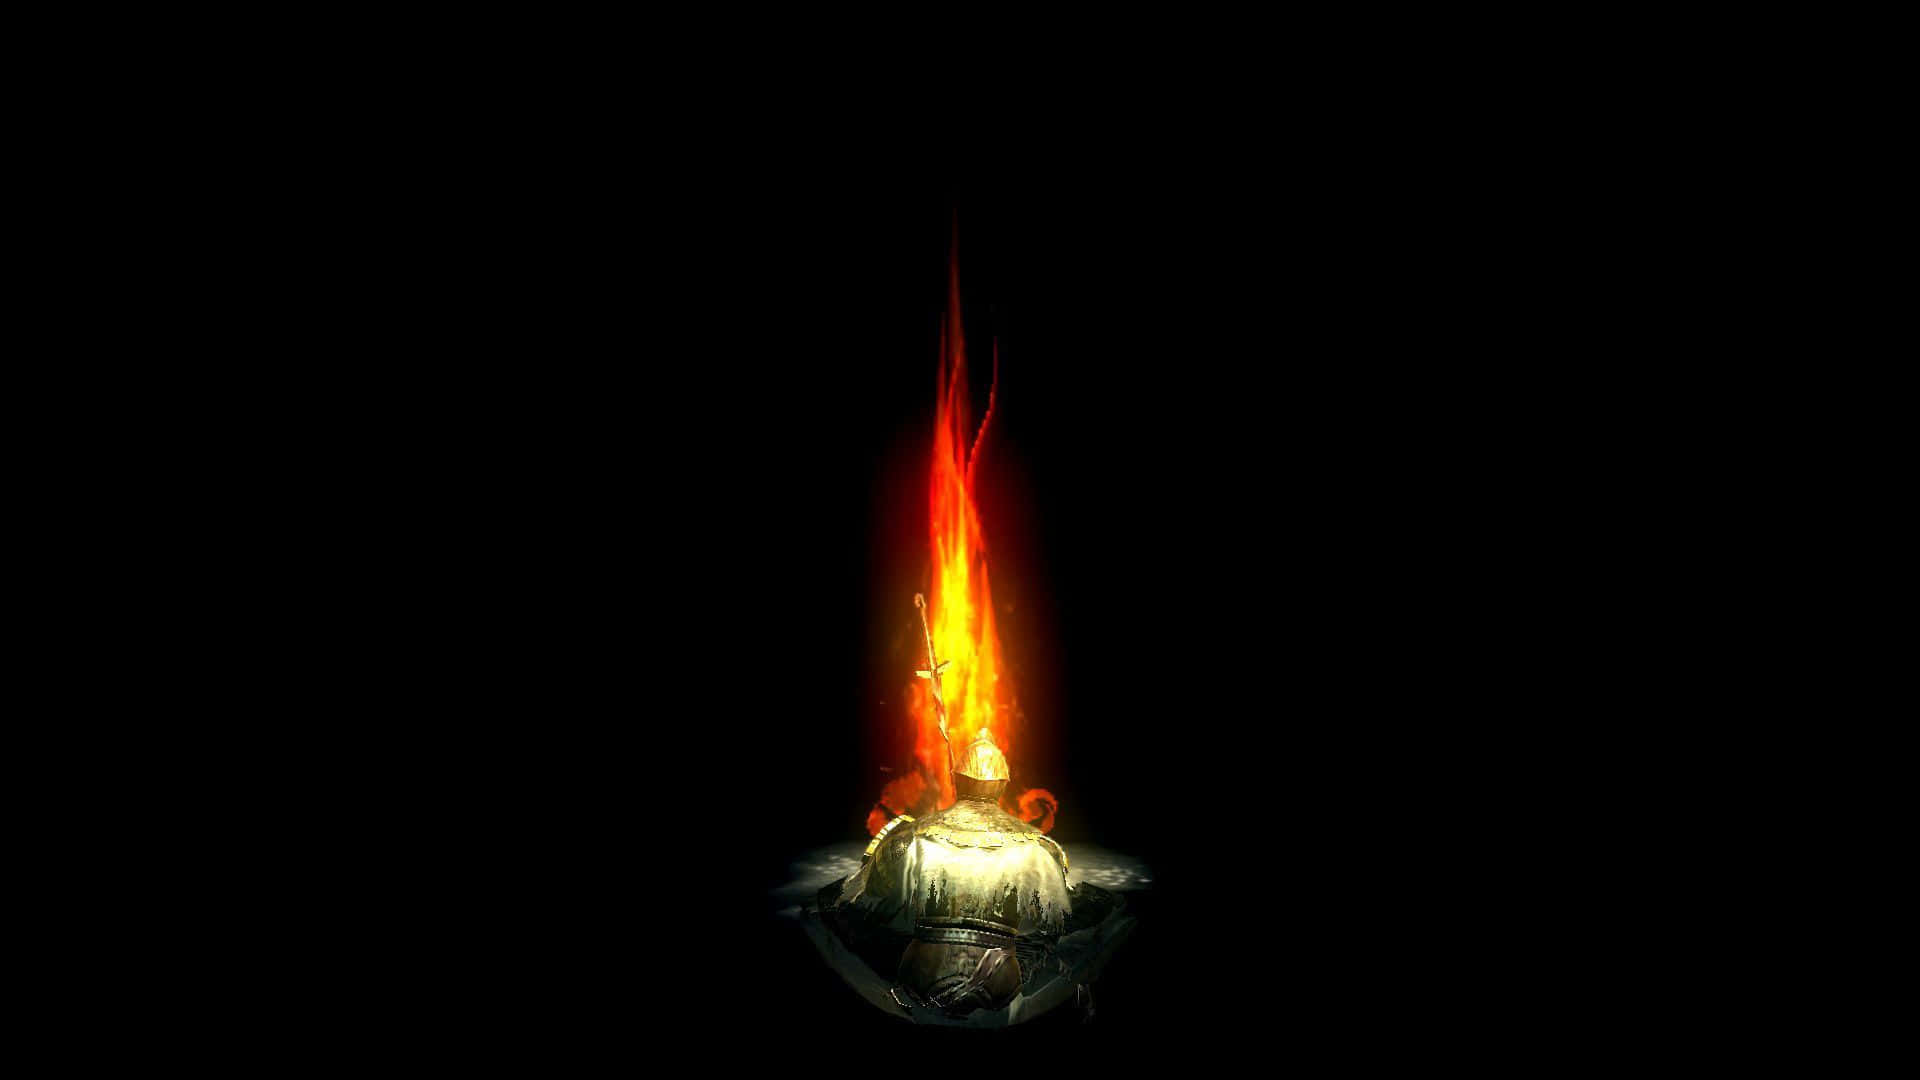 Rest and replenish at the iconic Dark Souls Bonfire Wallpaper